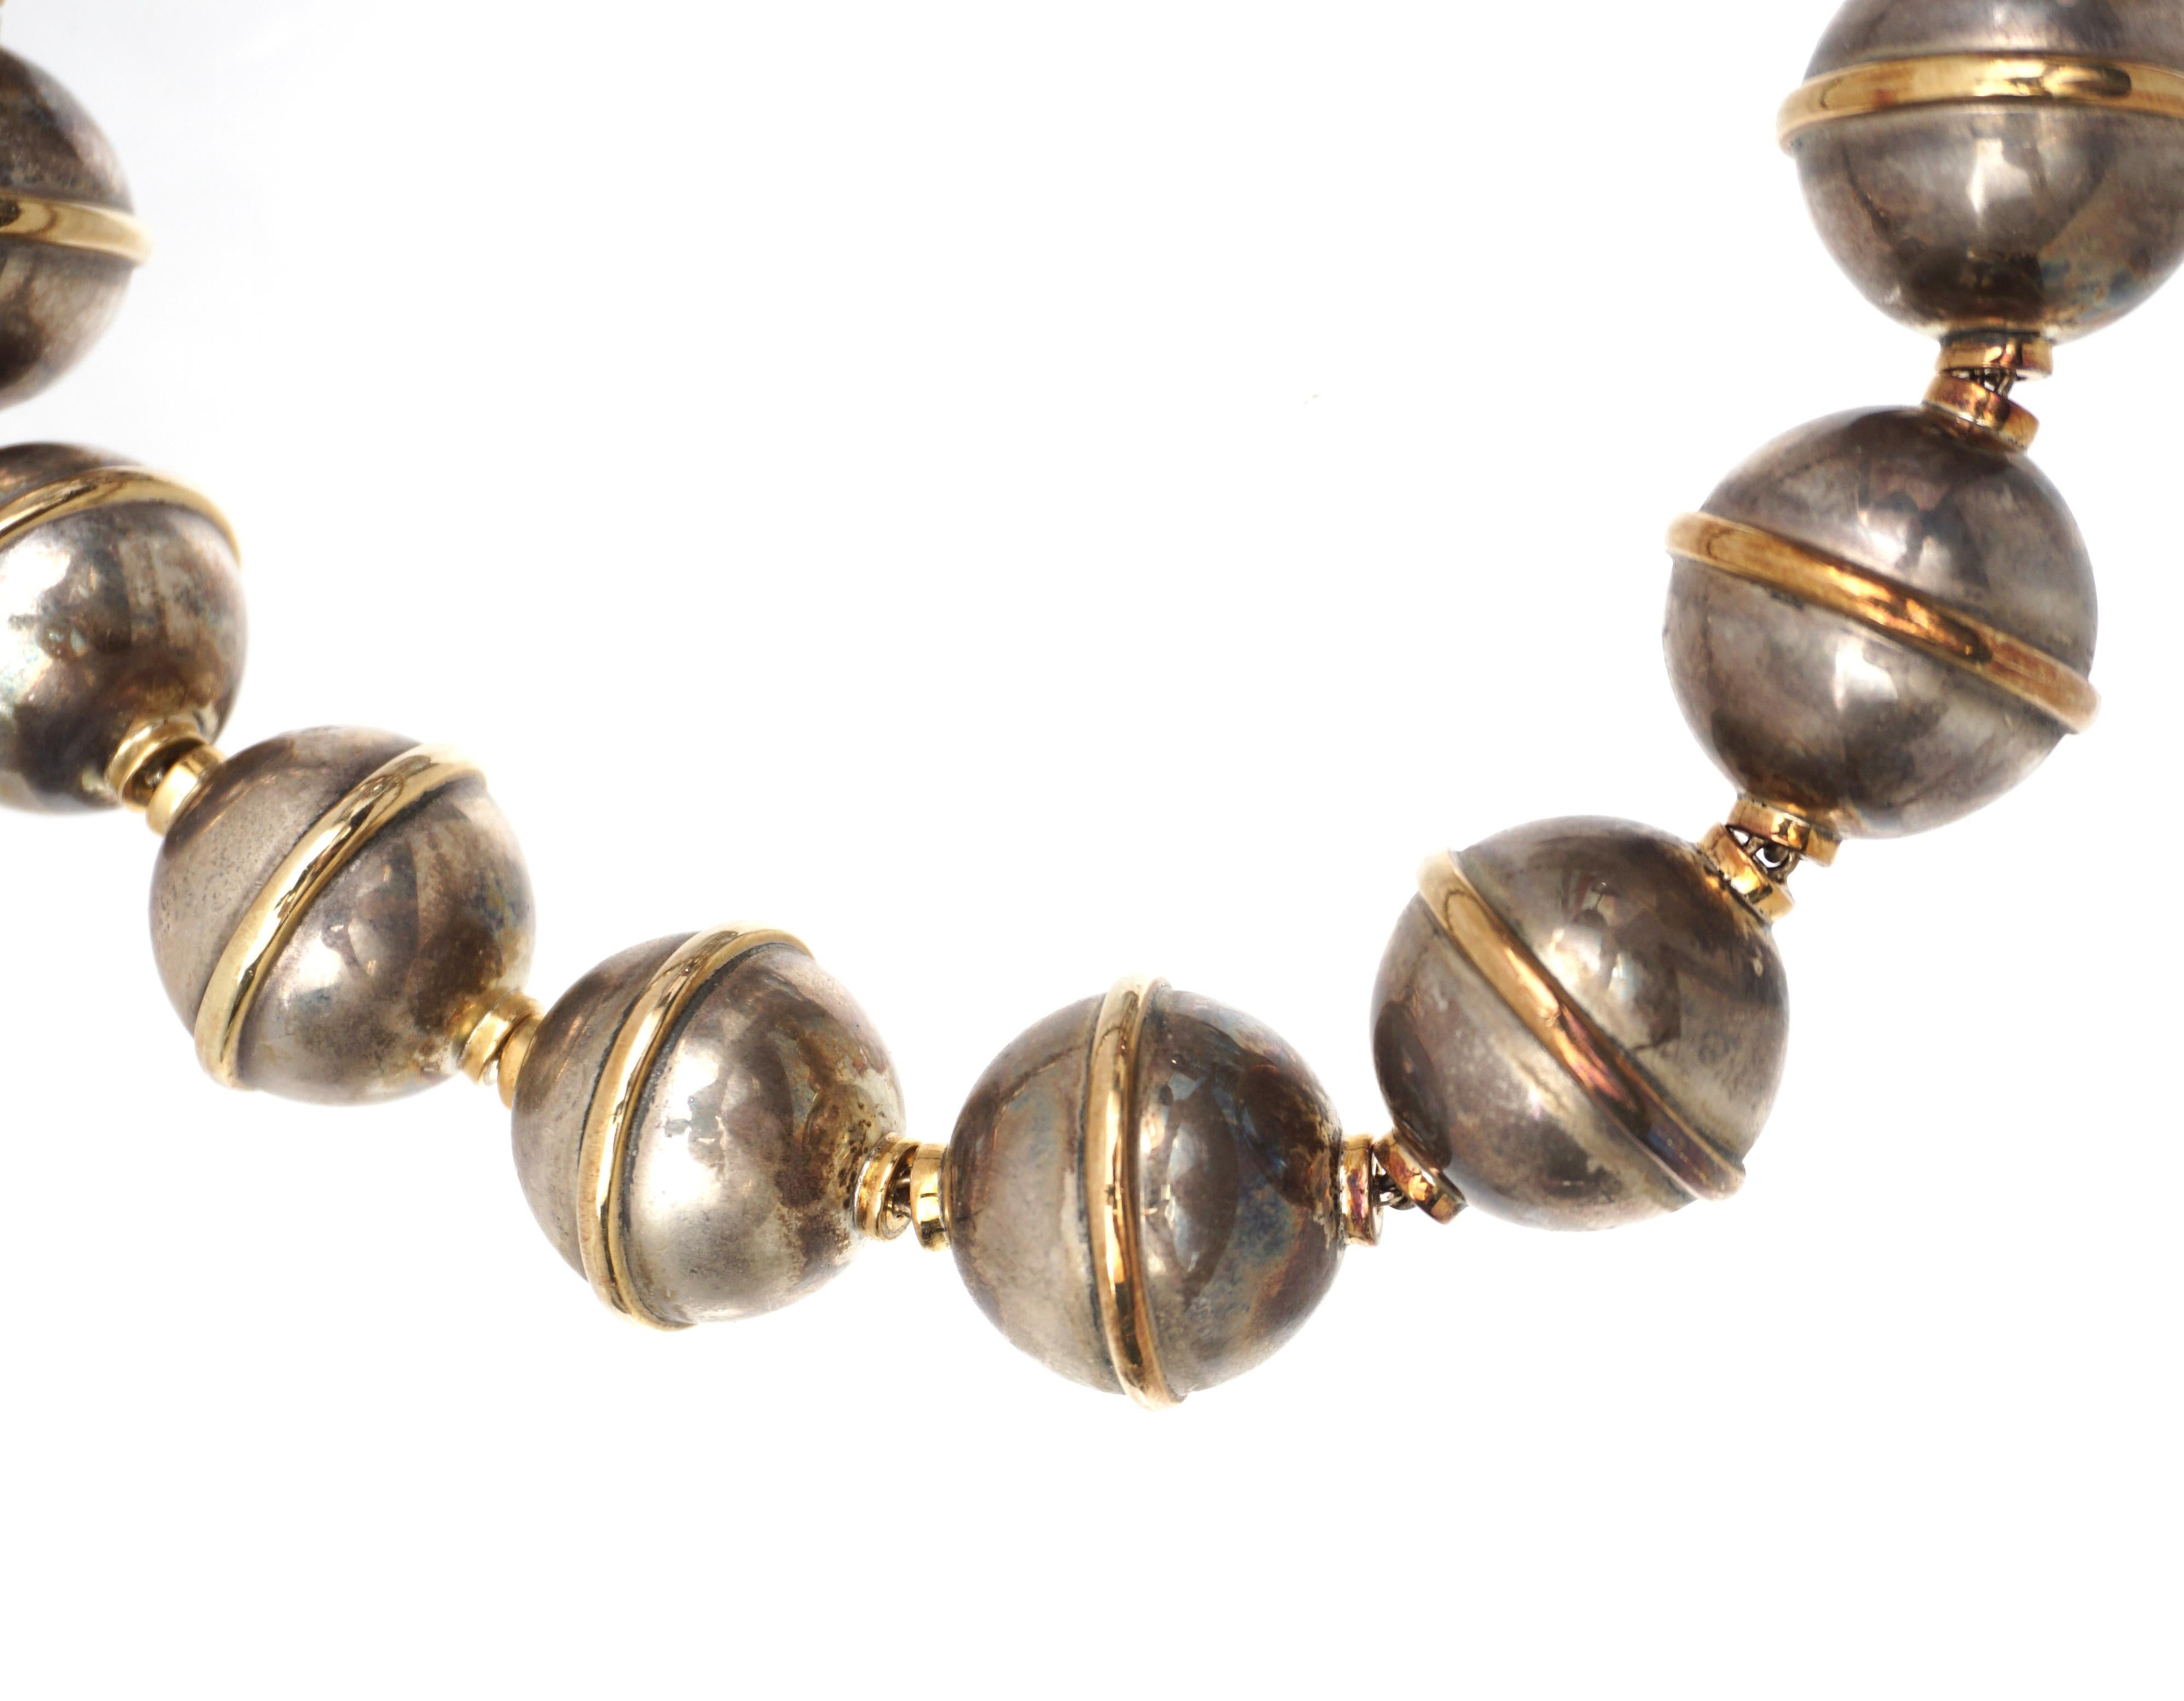 Paloma Picasso for Tiffany & Company, sterling silver bead necklace with 18K gold accent bands. Necklace is well marked 